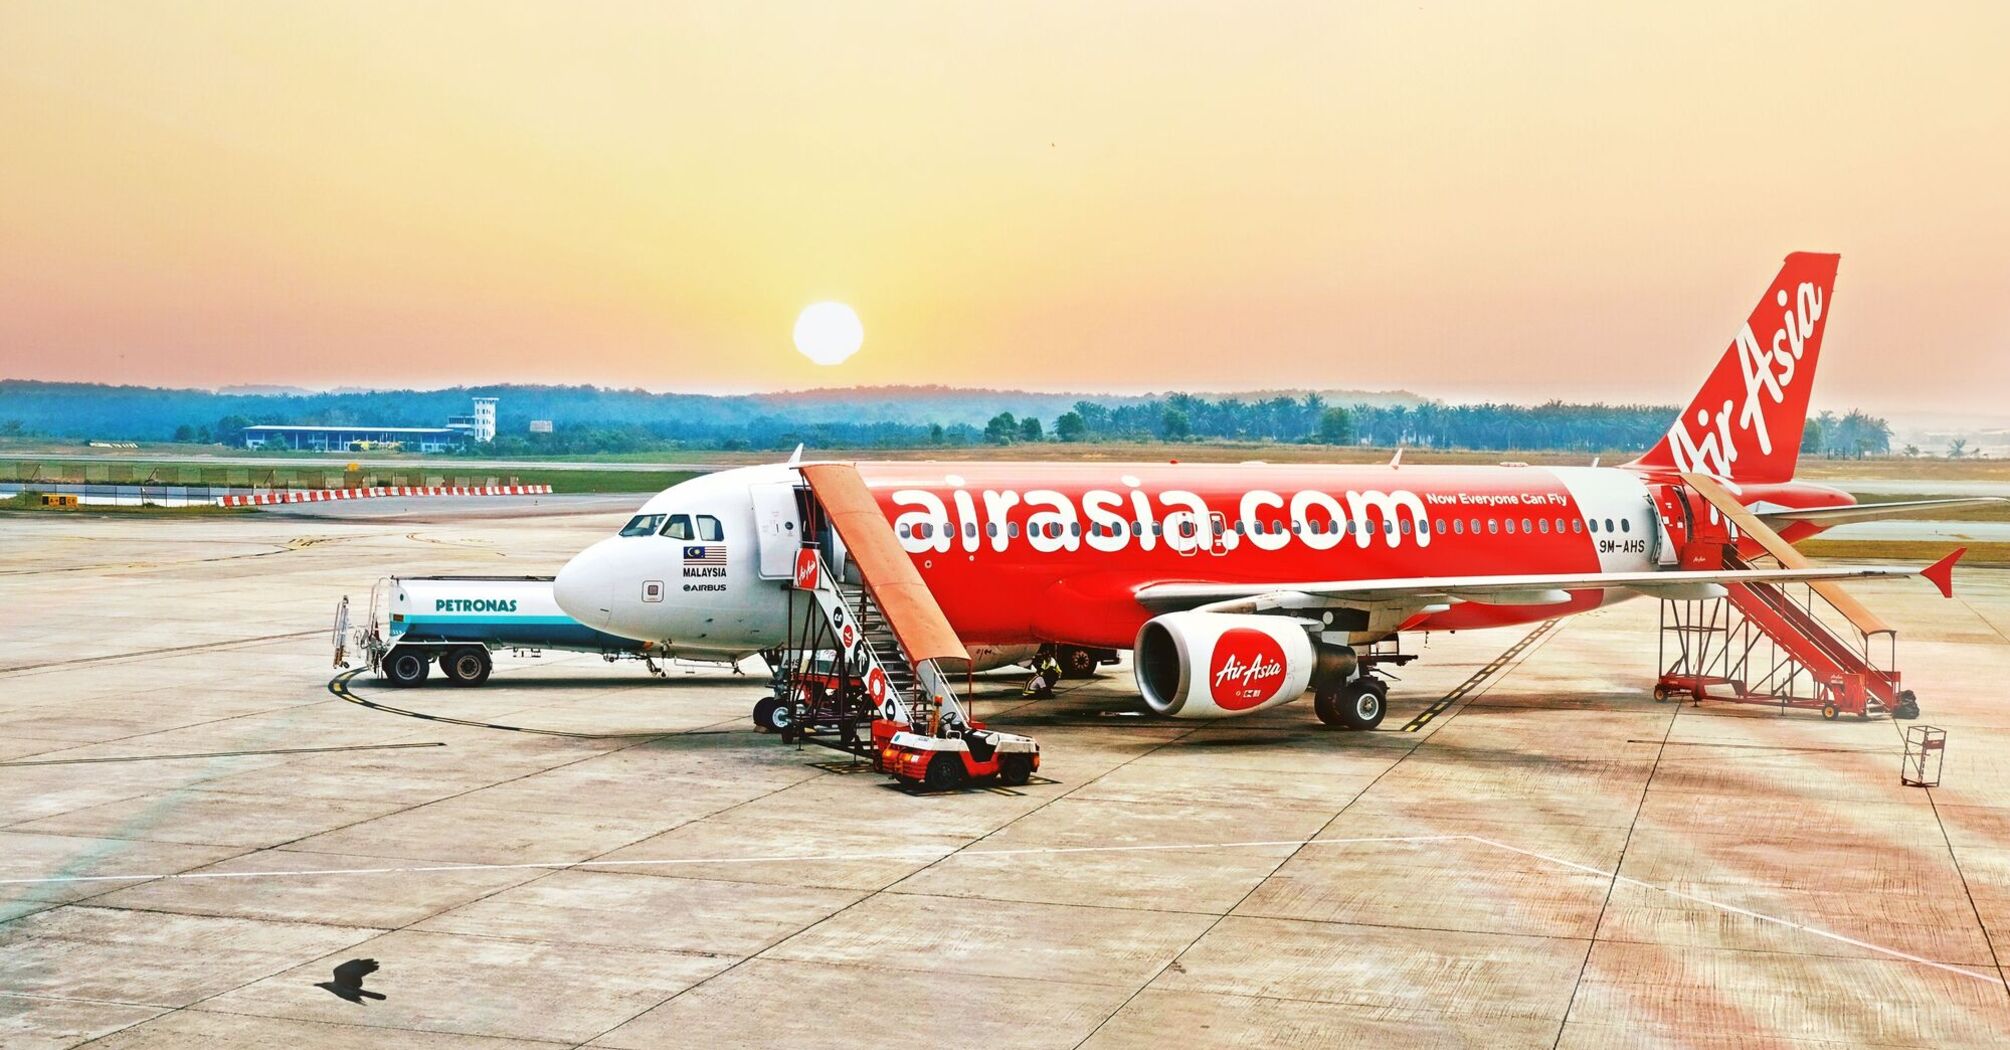 AirAsia company plane at the airfield